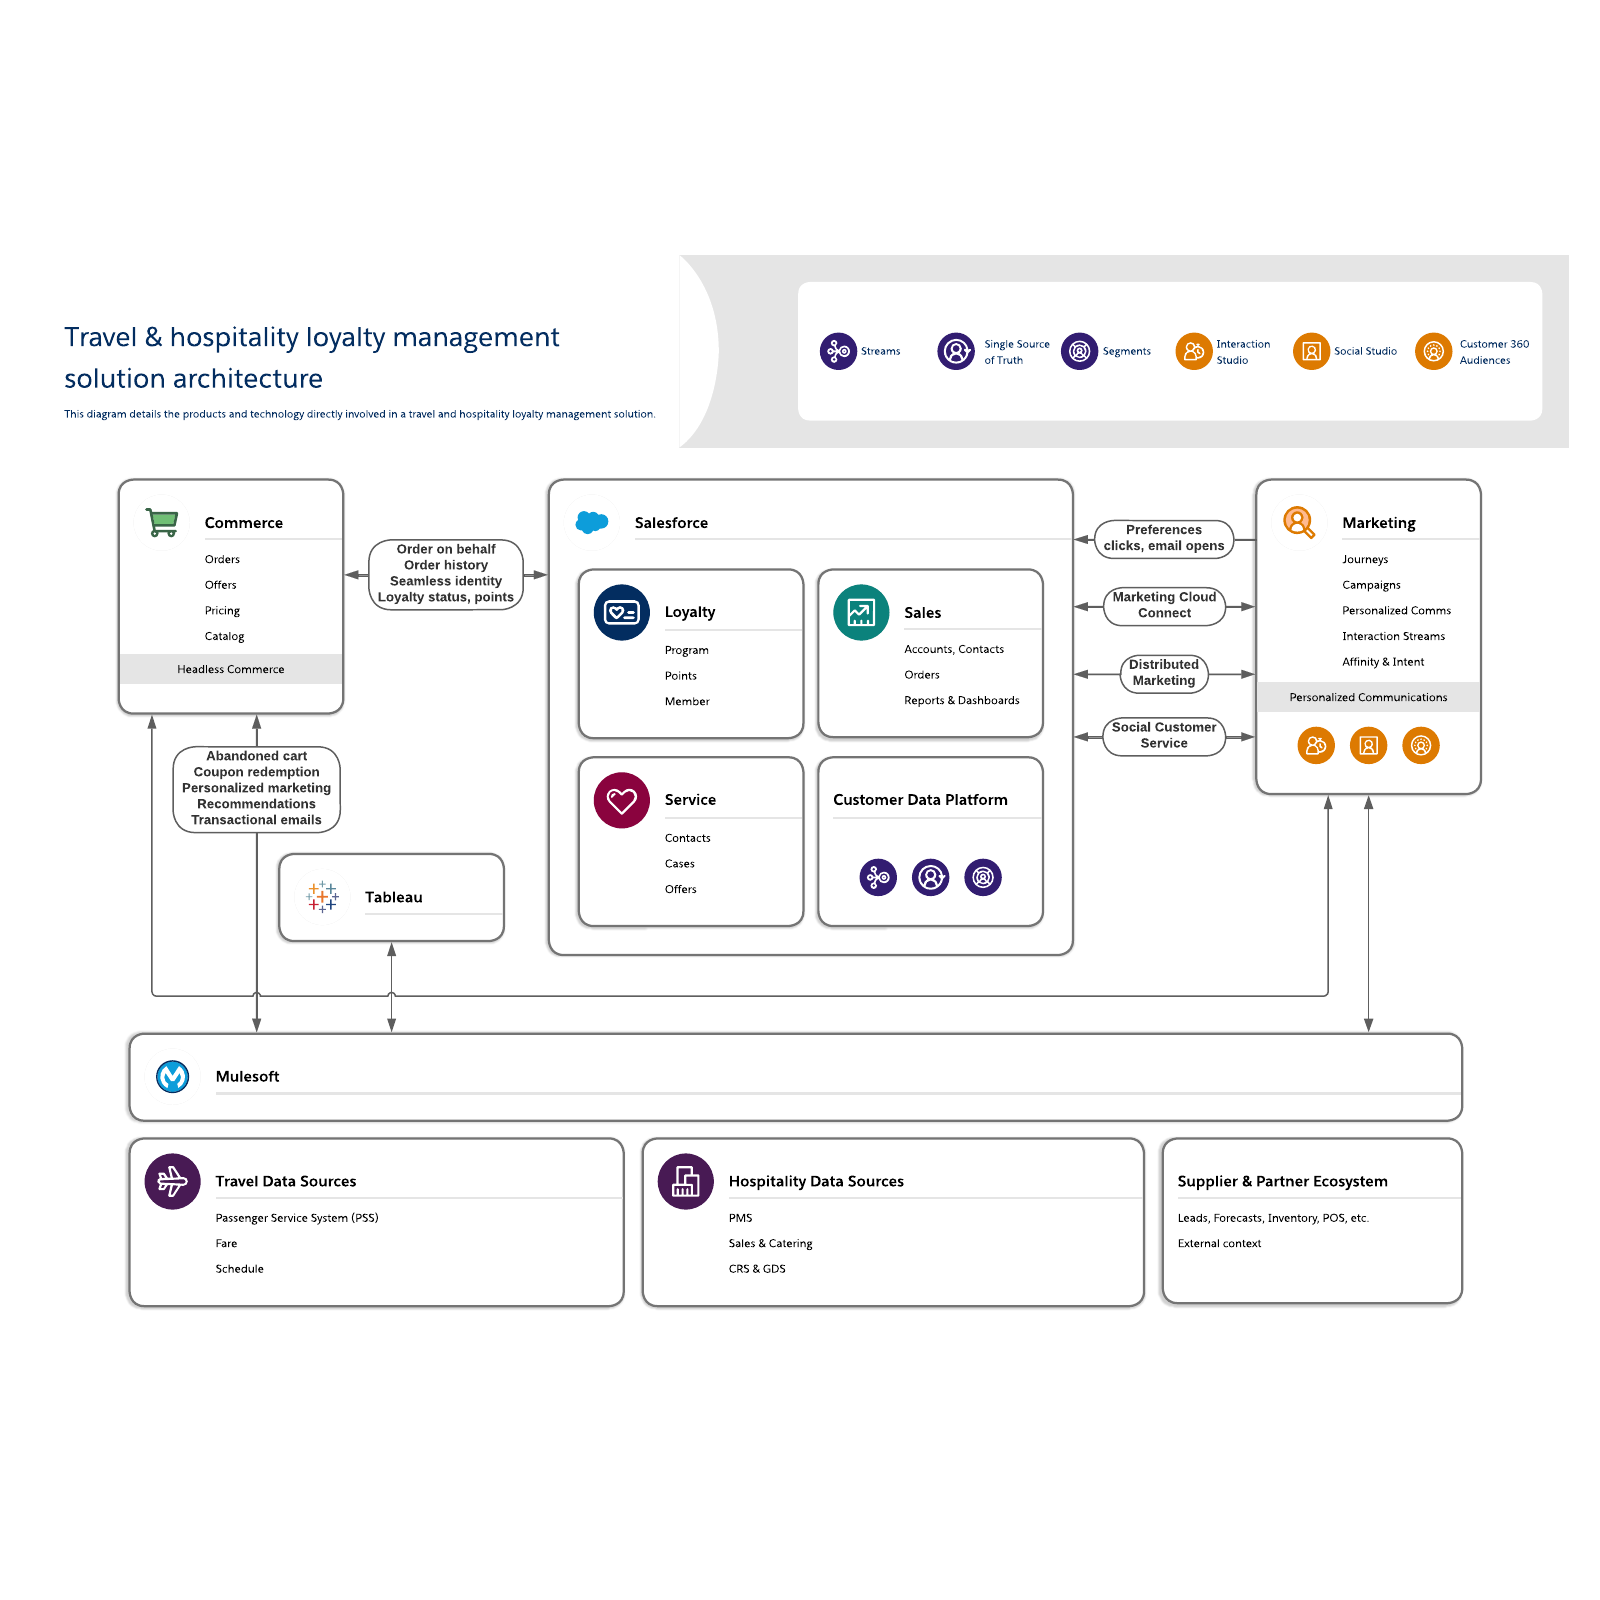 Travel & hospitality loyalty management solution architecture example